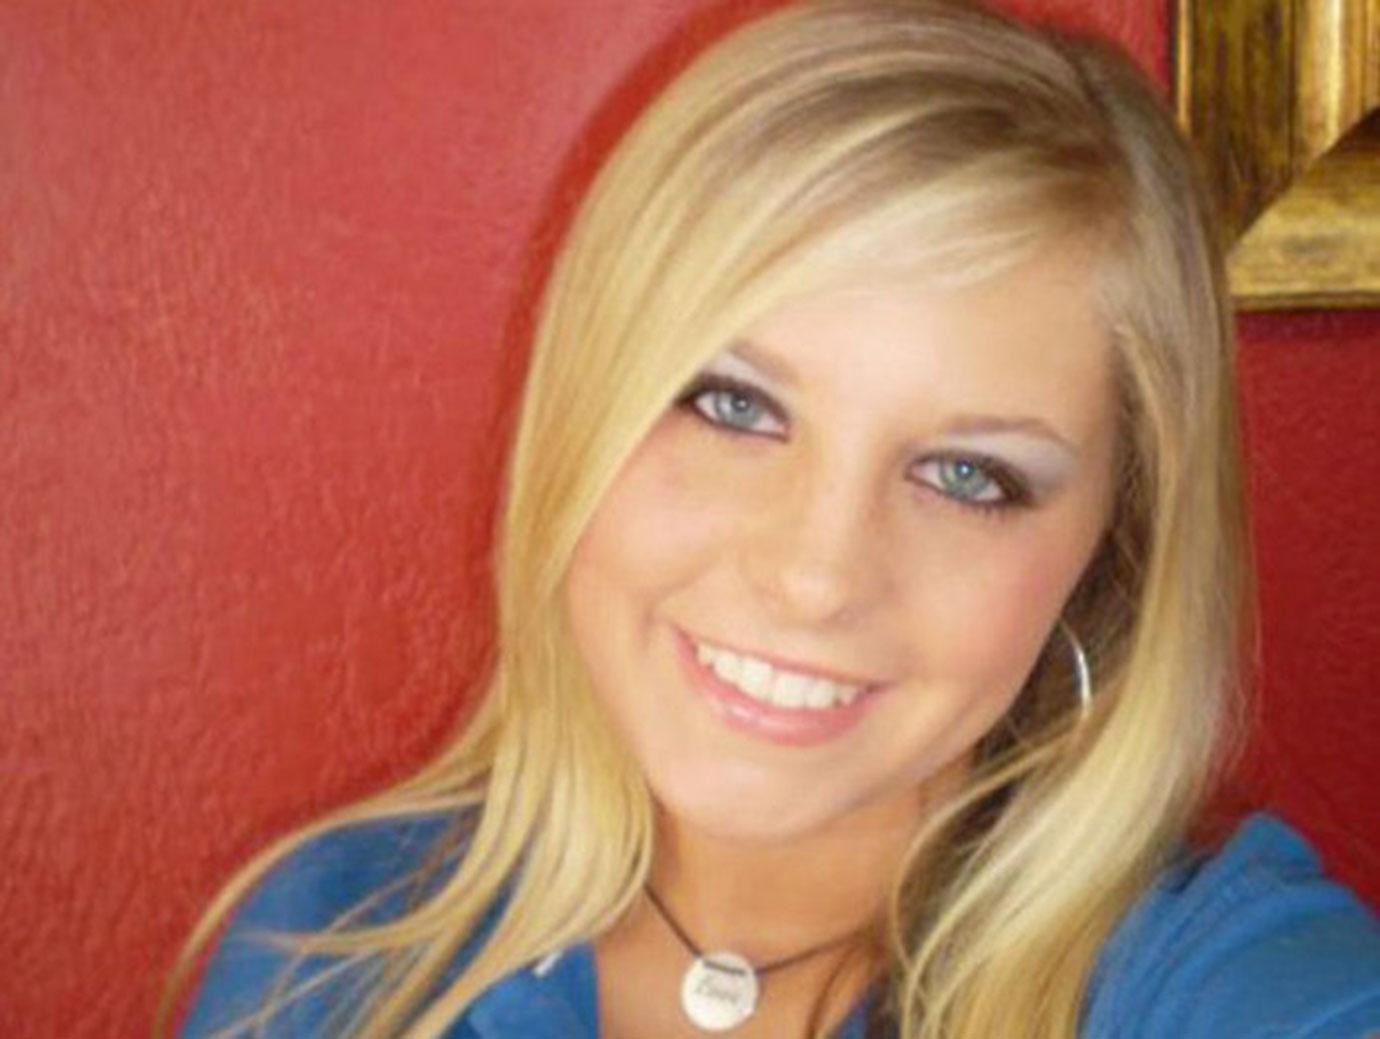 Holly Bobo Murder Trial Attorney For Killer Says Defendant Changes